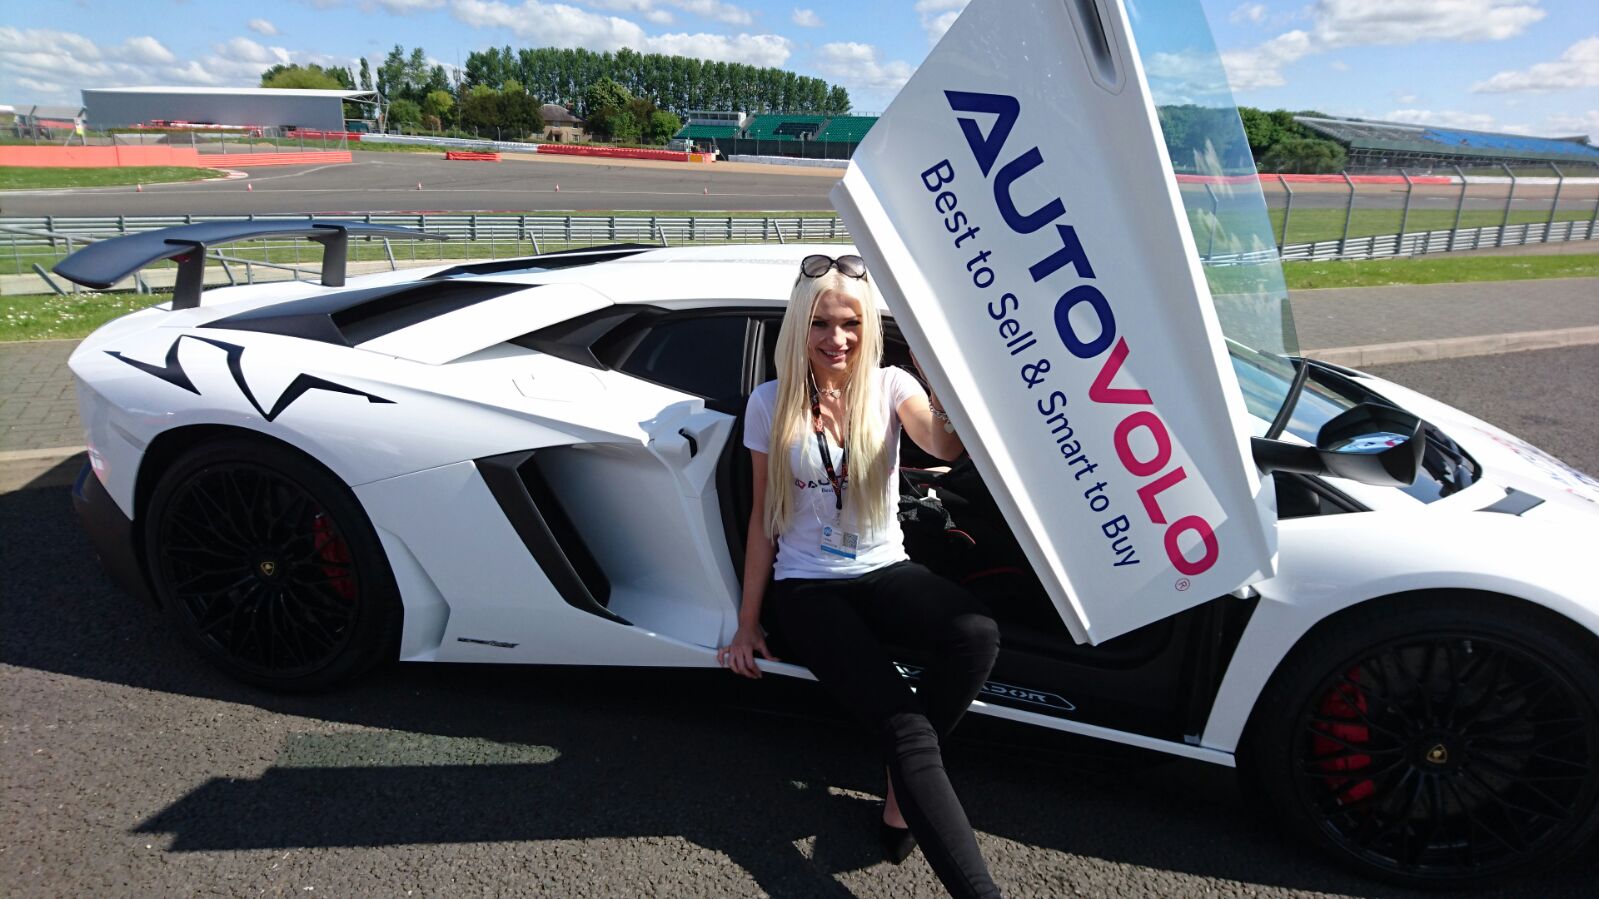 Promotional Models At Silverstone Racetrack